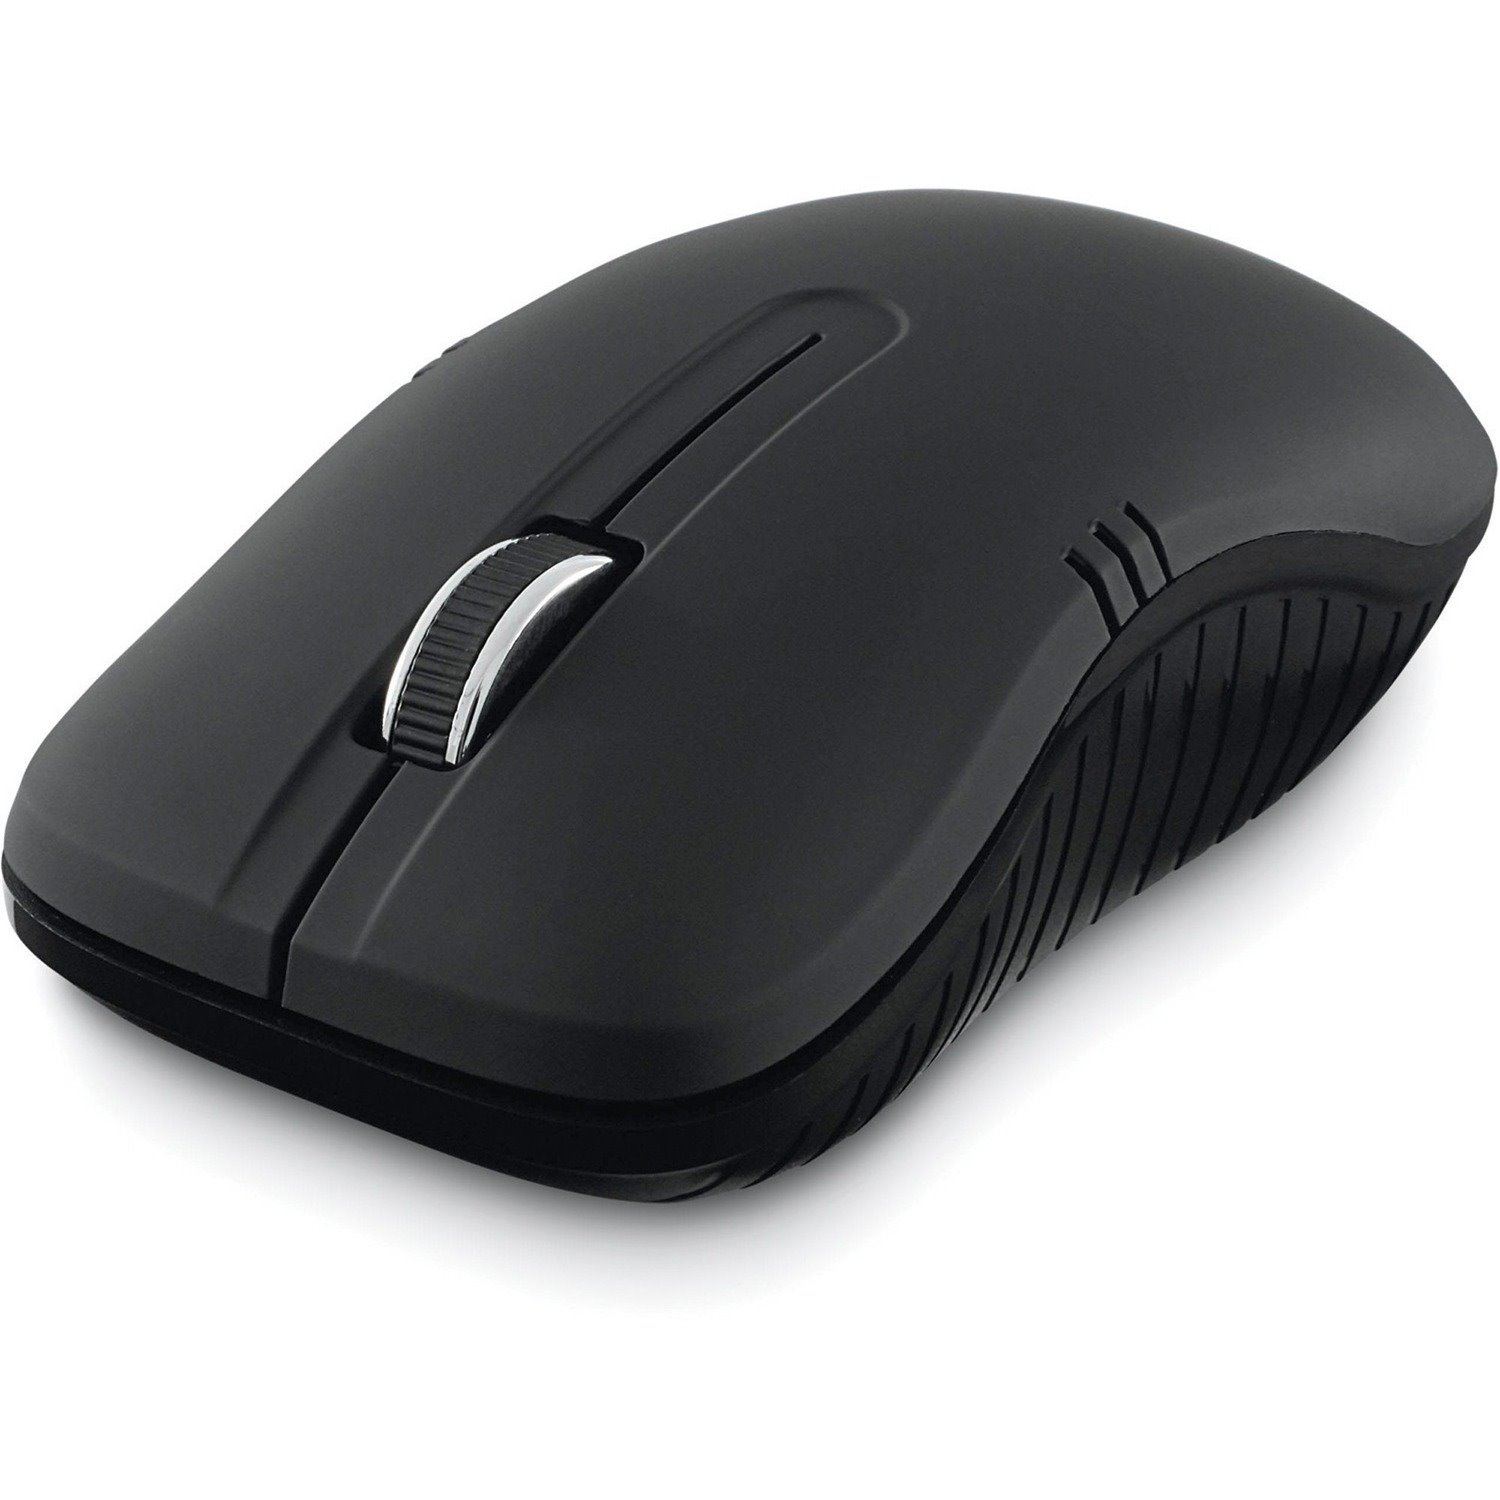 Verbatim Commuter Mouse - Radio Frequency - USB Type A - Optical - 3 Button(s) - Matte Black - 1 Pack